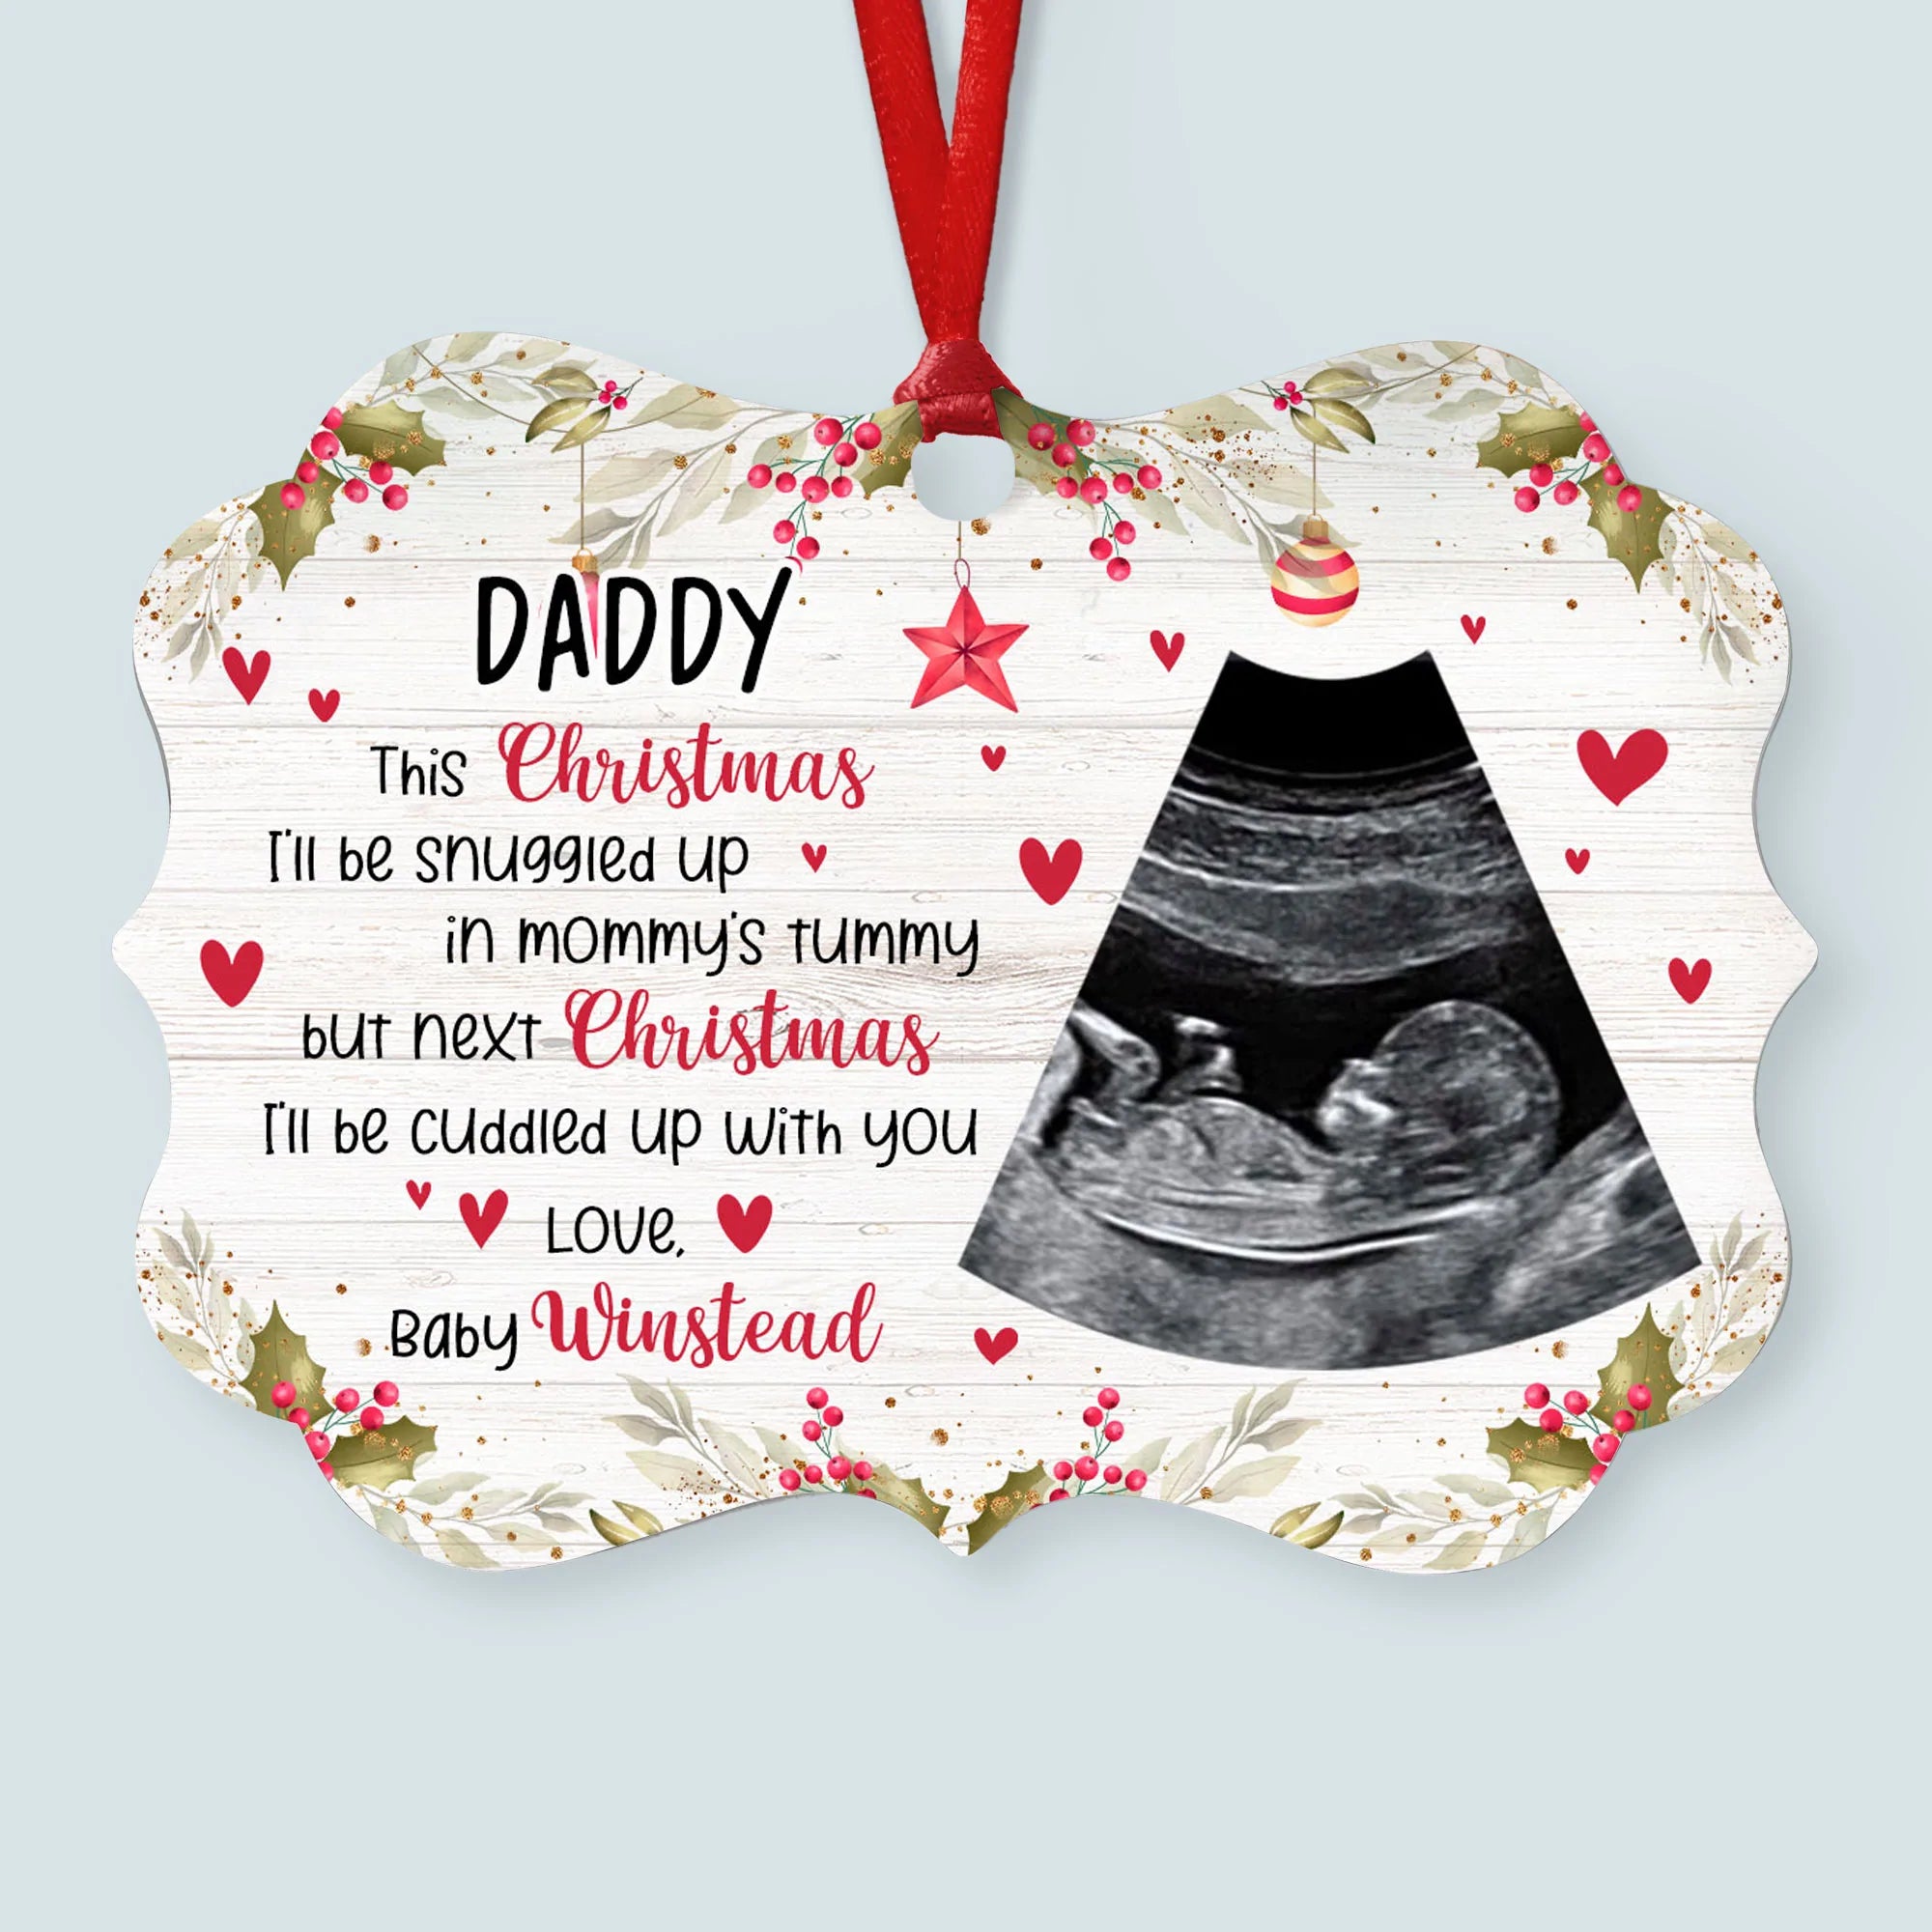 The Bump Christmas Ornament Personalized Gift For Expecting Parents